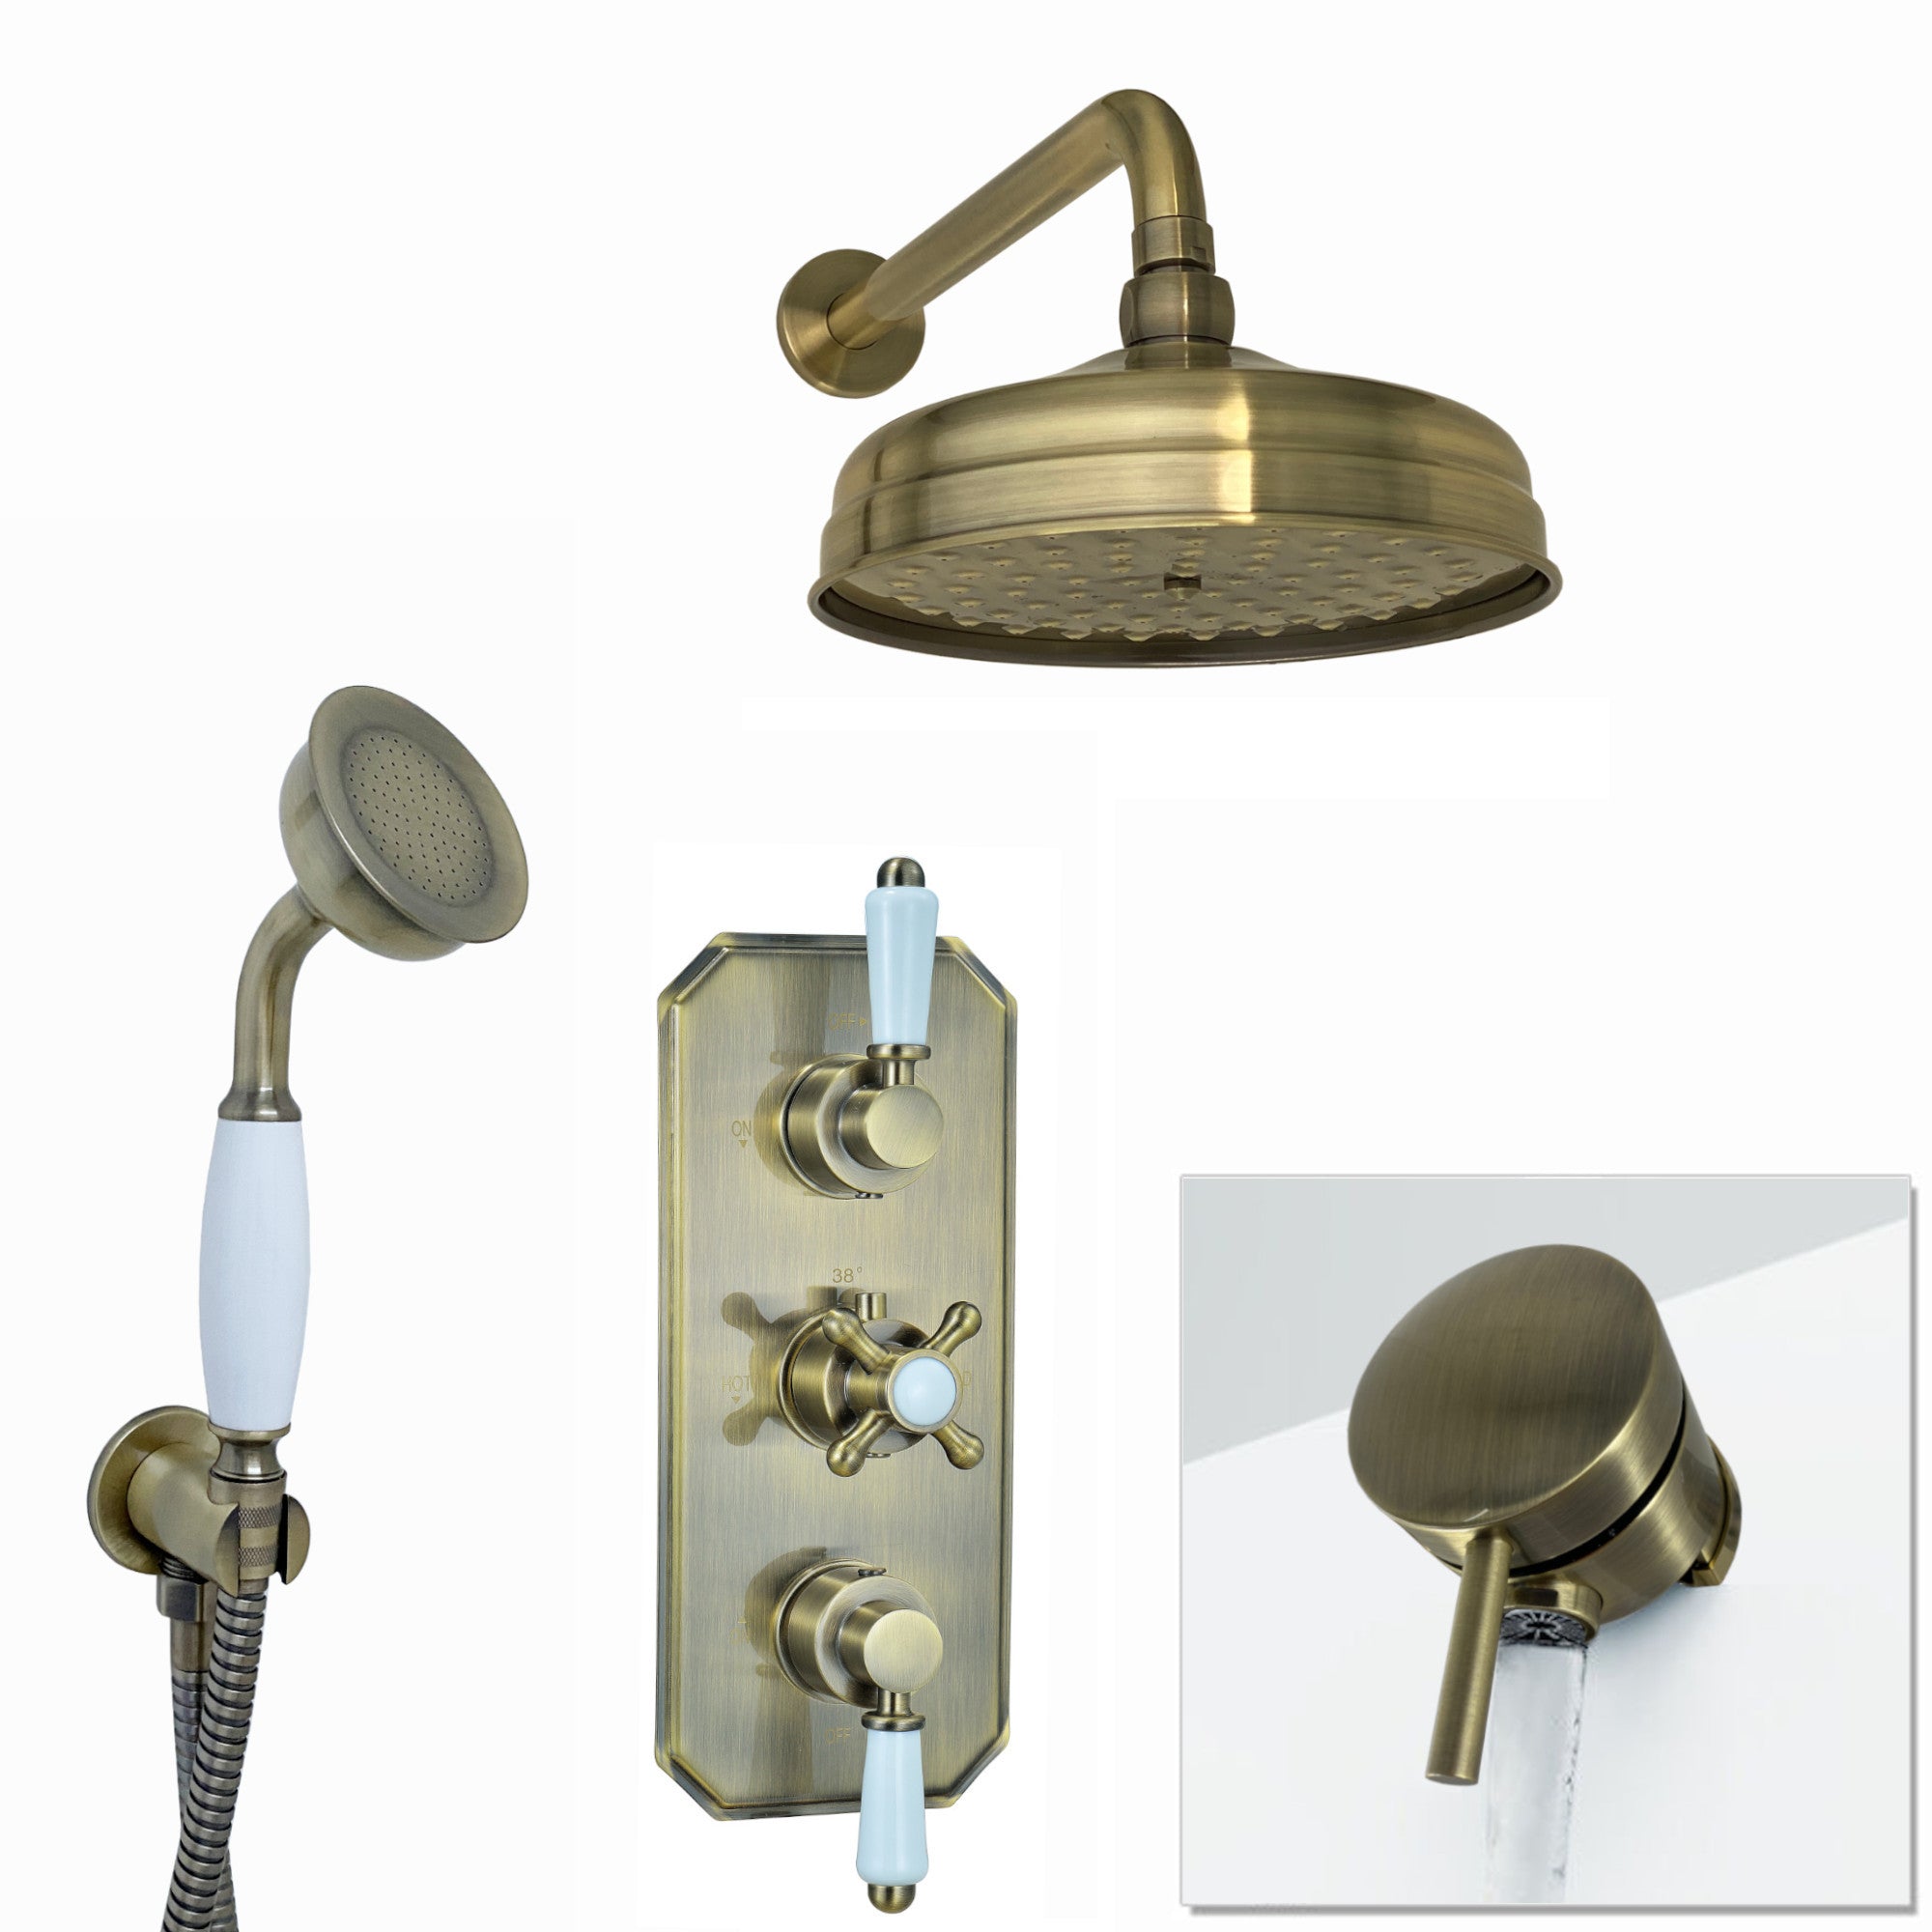 Regent Traditional Crosshead And White Lever Concealed Thermostatic Shower Set Incl. Triple Diverter Valve, Wall Fixed 8" Shower Head, Handshower Kit, Bath Filler Waste with Overflow - Antique Bronze (3 Outlet)